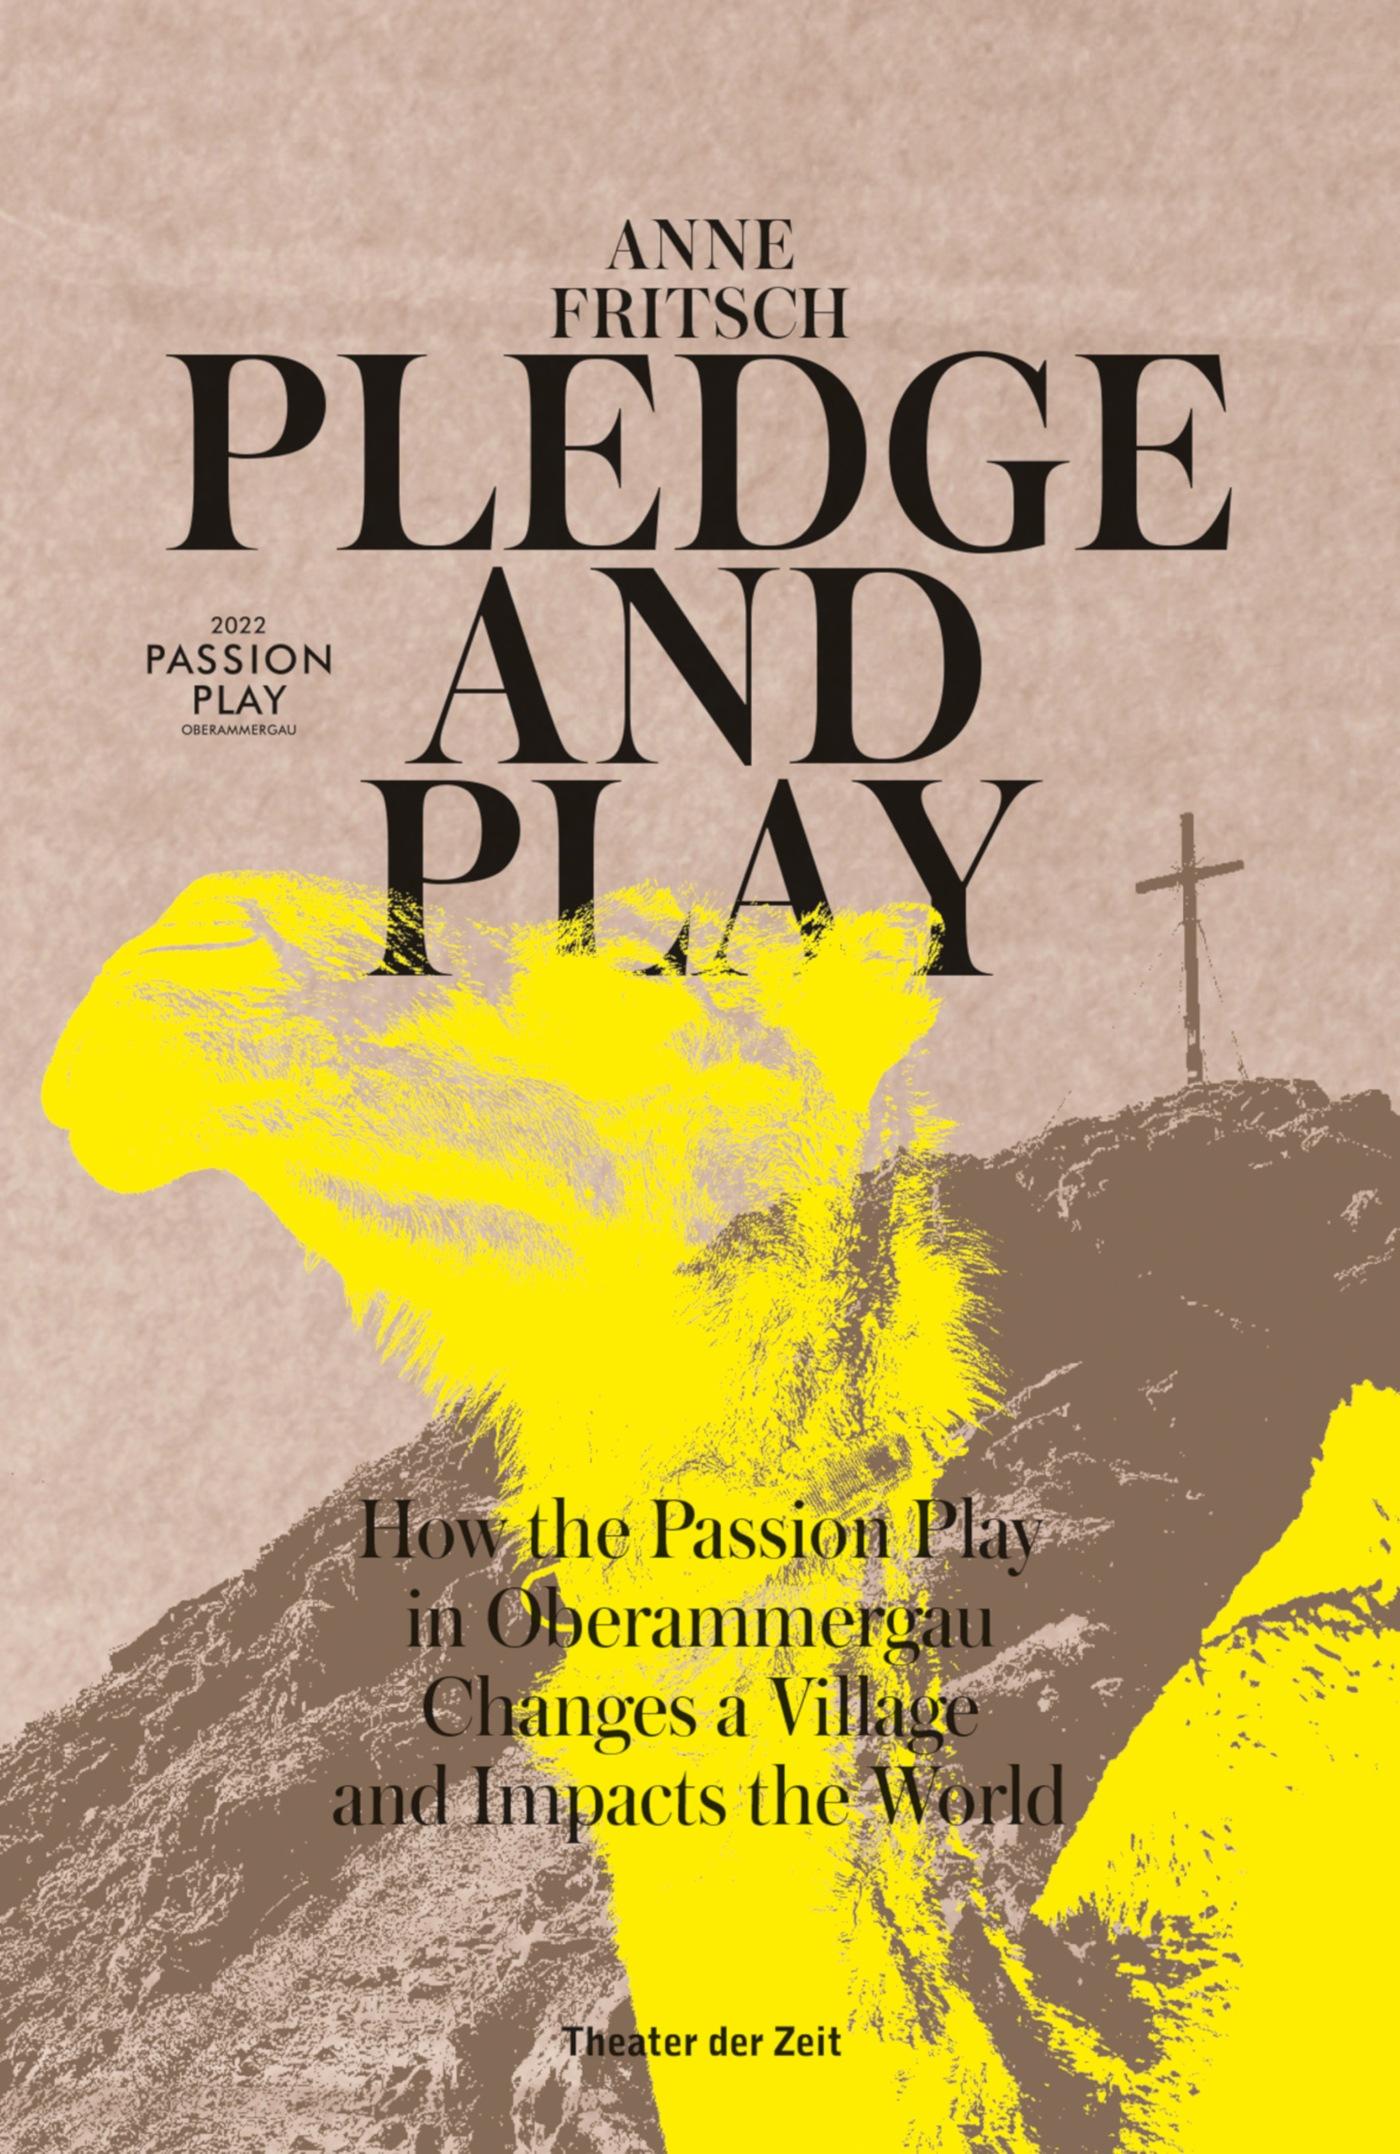 "Pledge and Play"